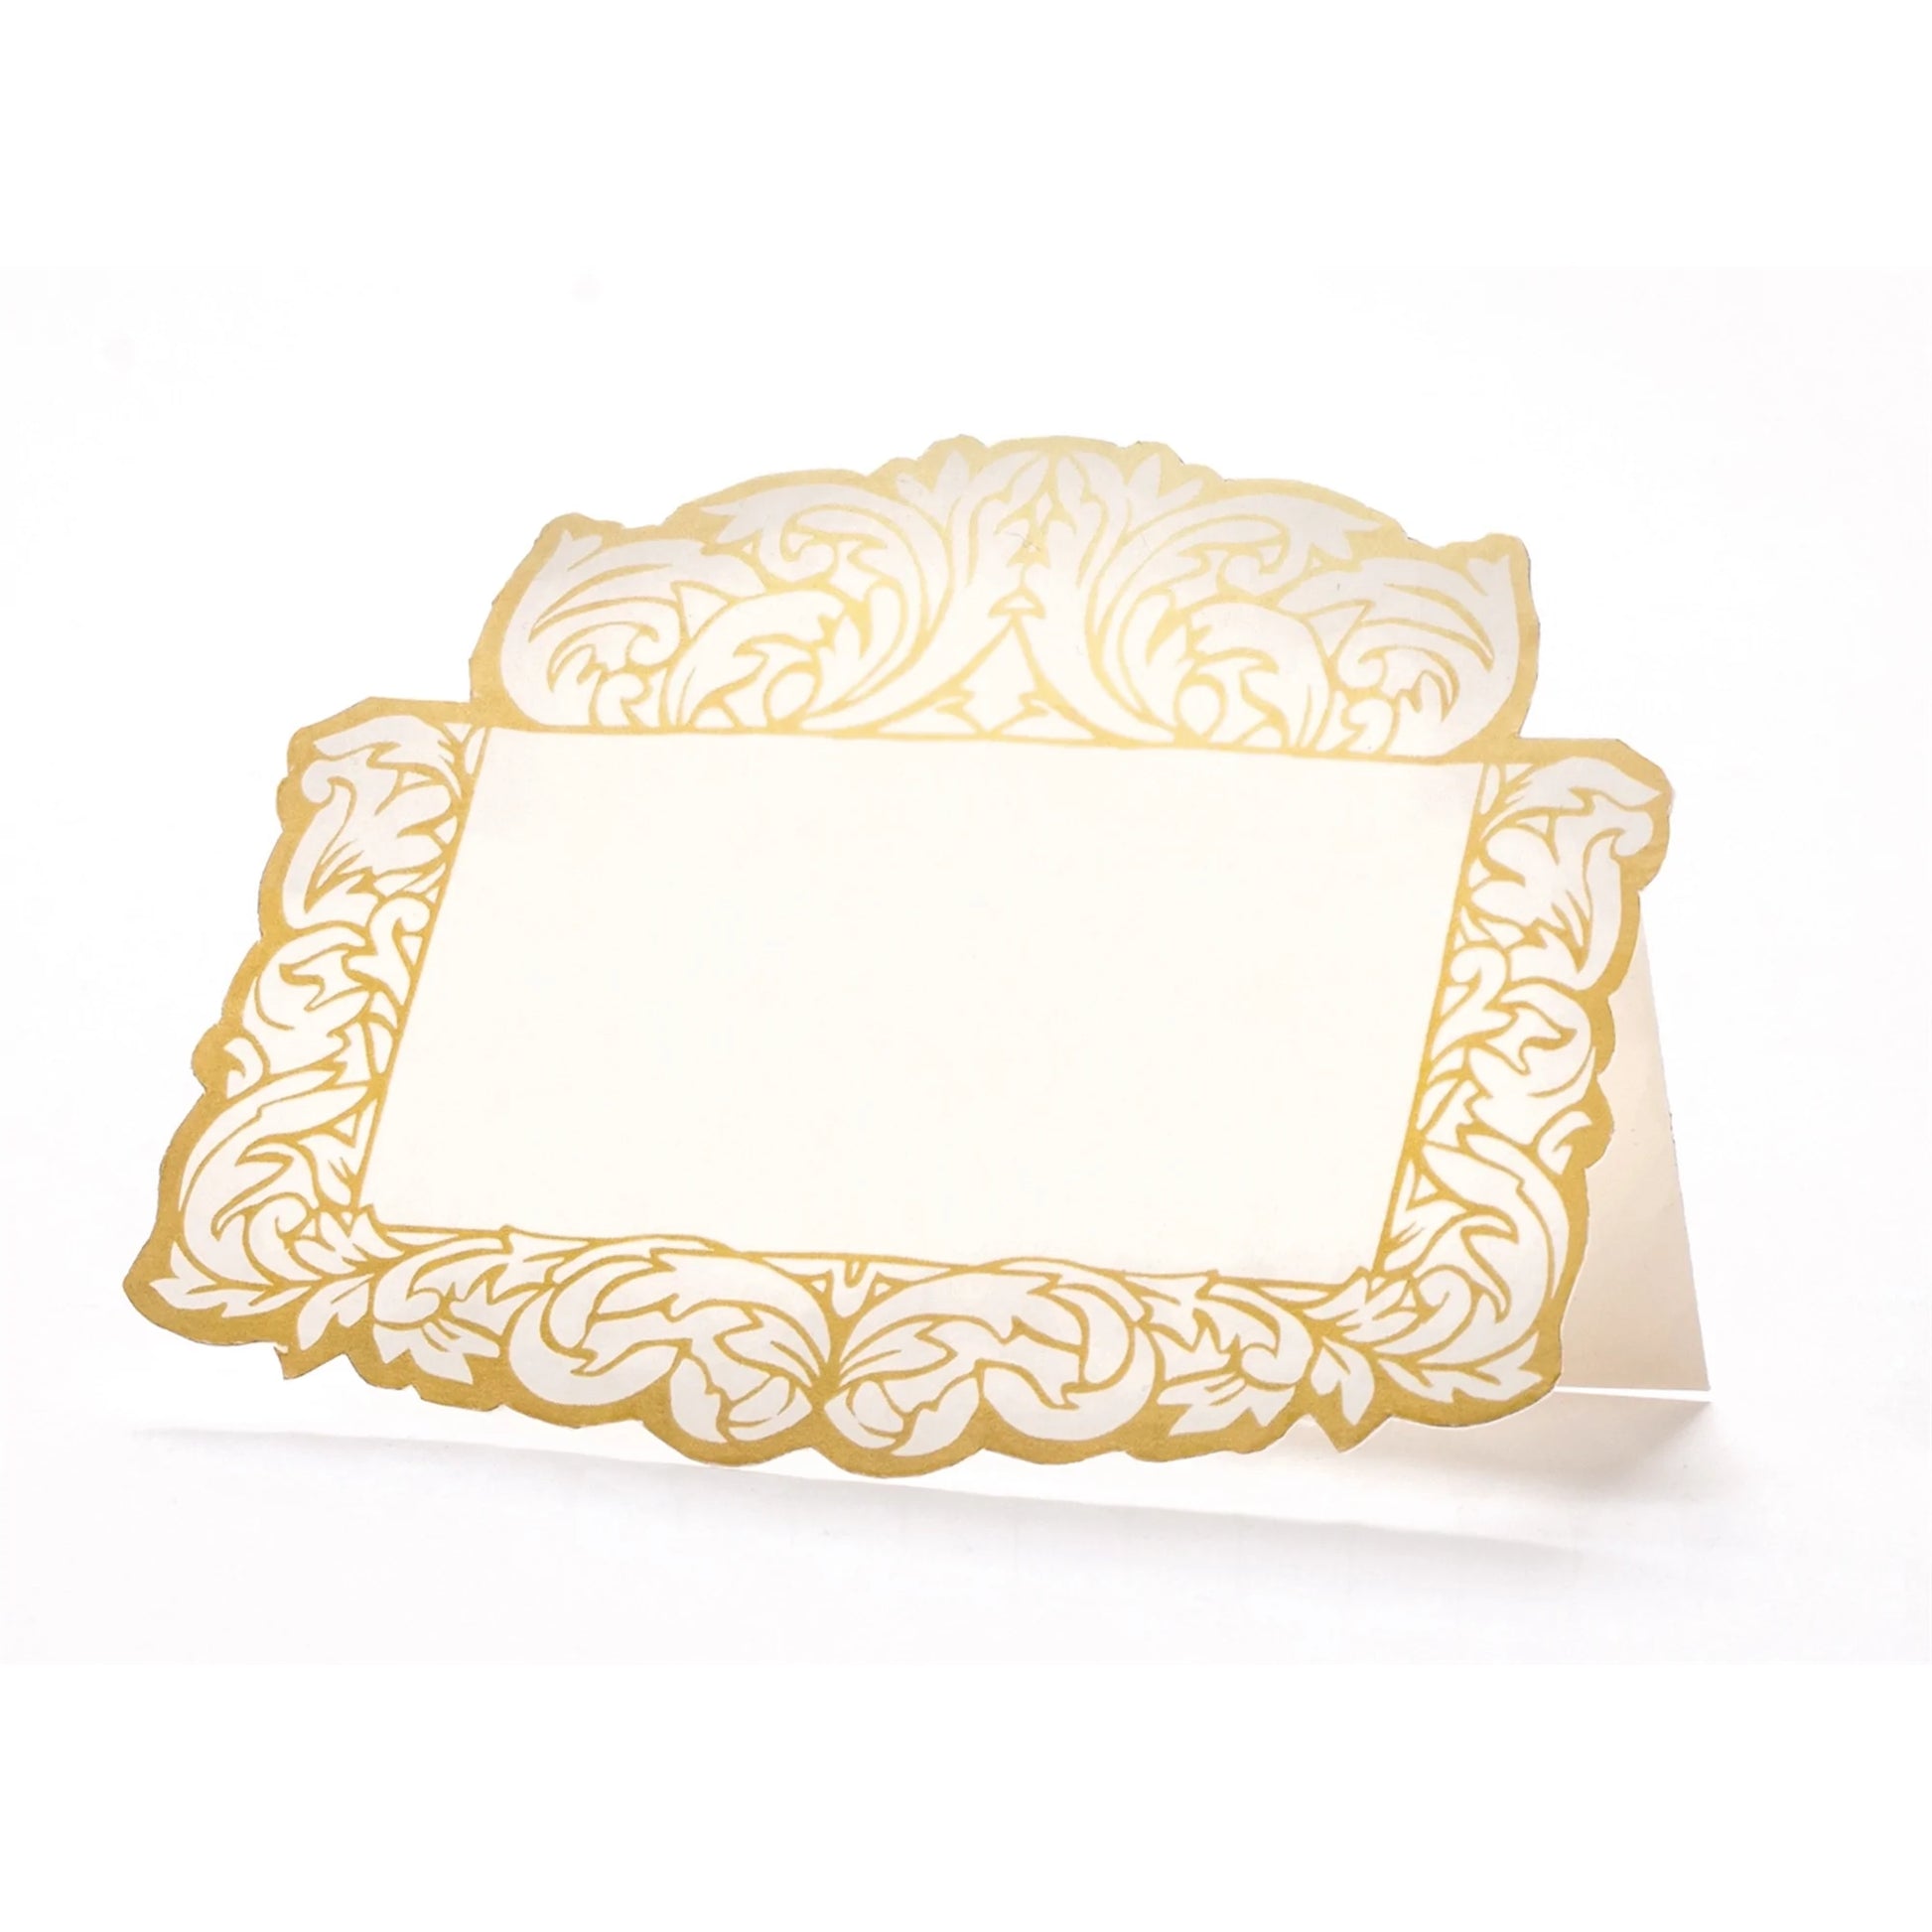 This shows the detail of this die cut gilded place card